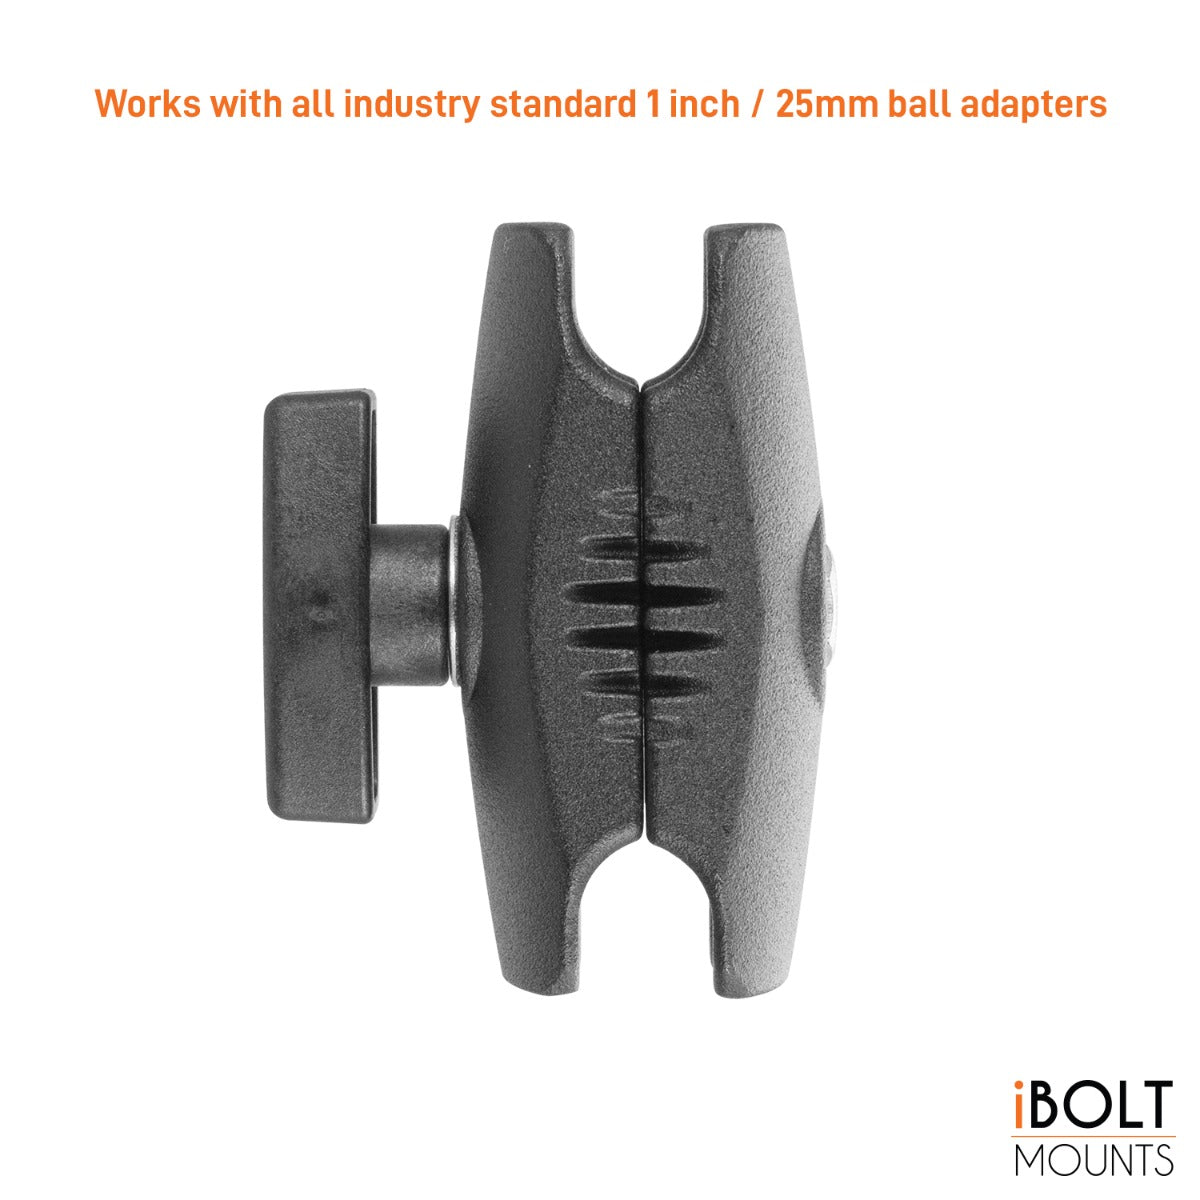 iBOLT™ Aluminum 2.75 inch Double Socket Arm for 1-inch / 25mm / B Size Ball adapters